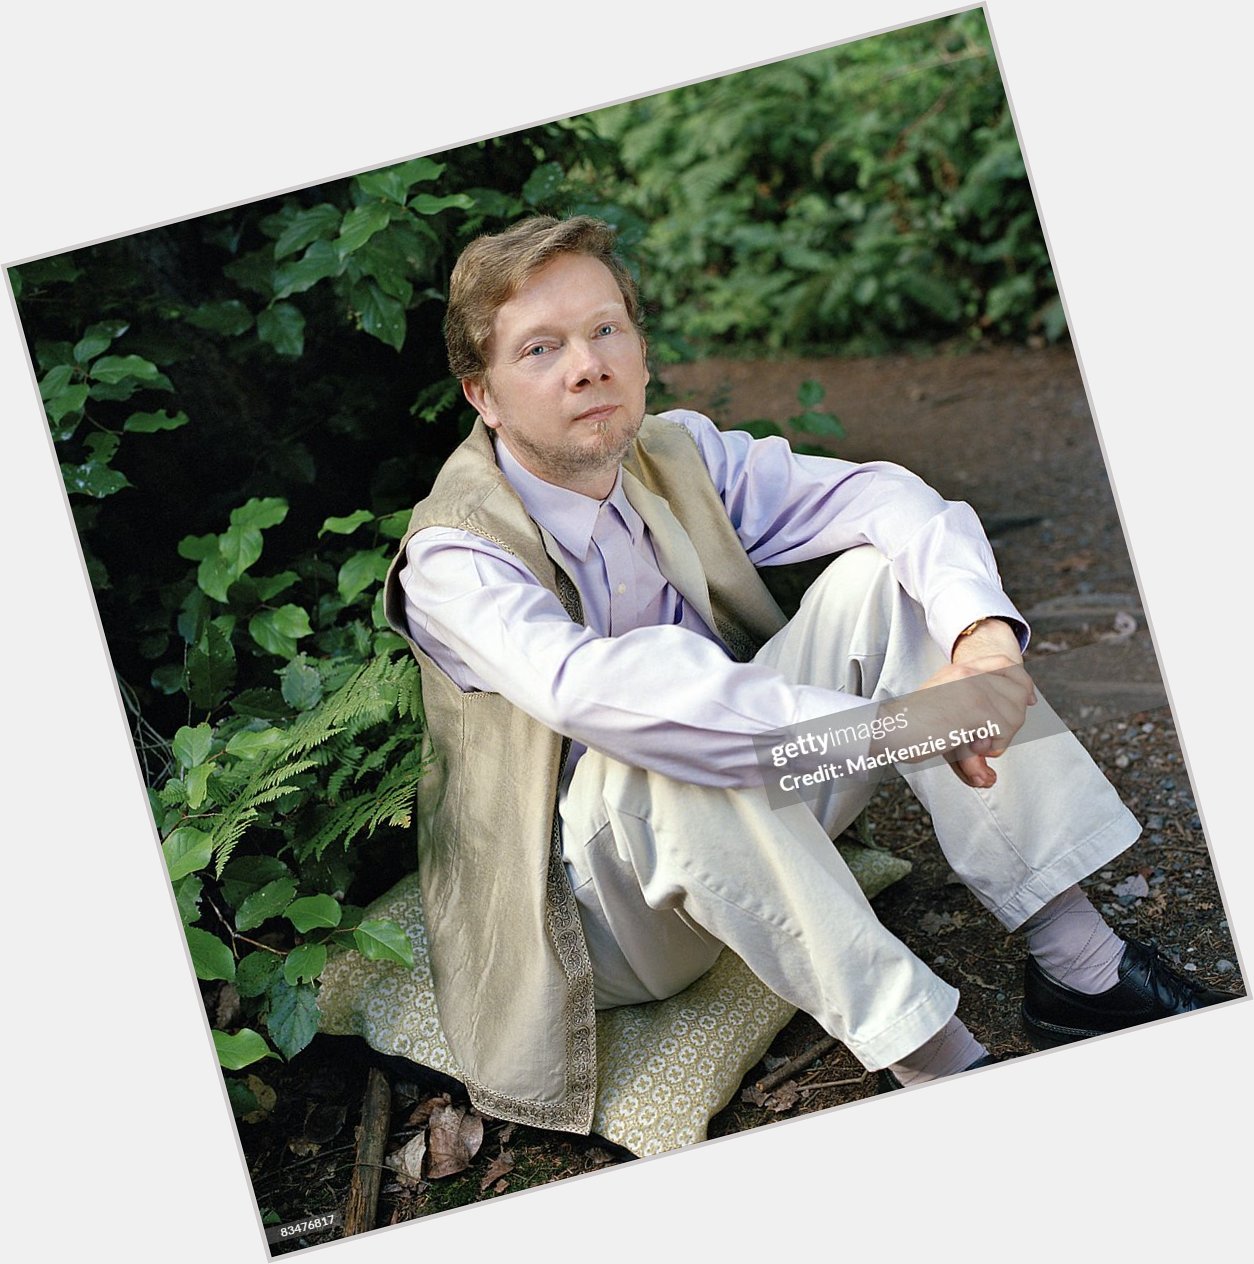 Eckhart Tolle where who 3